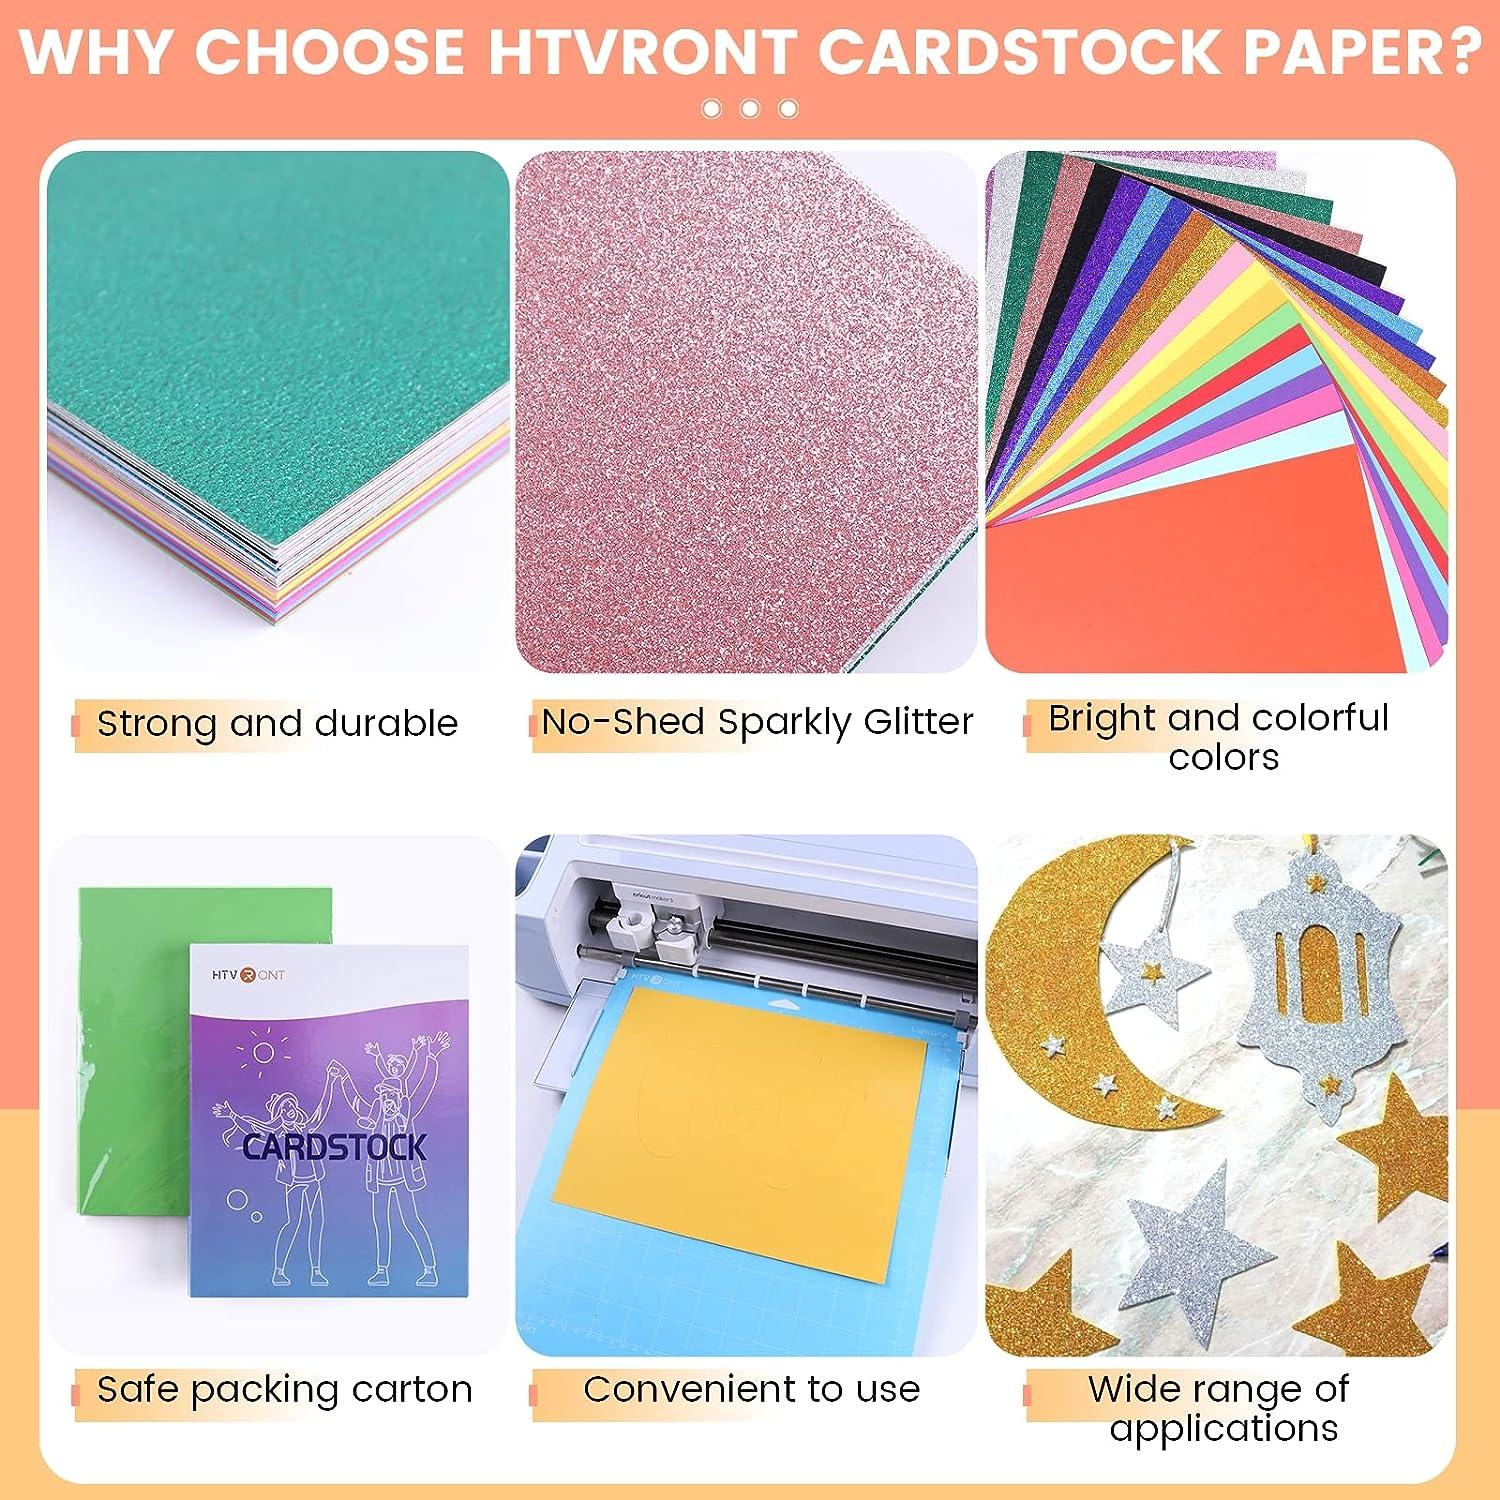 Colored Cardstock for Paper Crafts, Christmas Cards UAE